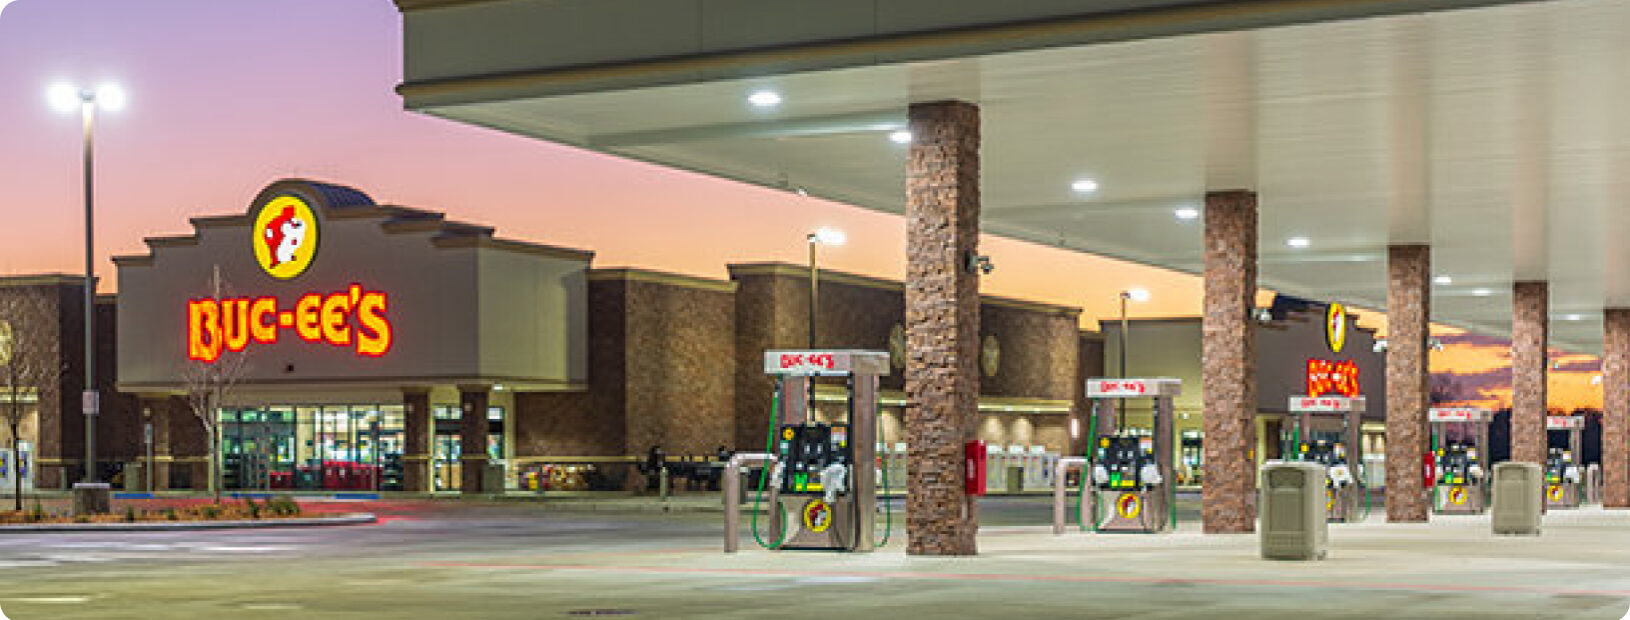 Wide-angle photo of Buc-ee's convenience store & gas station location with fuel pumps in foreground